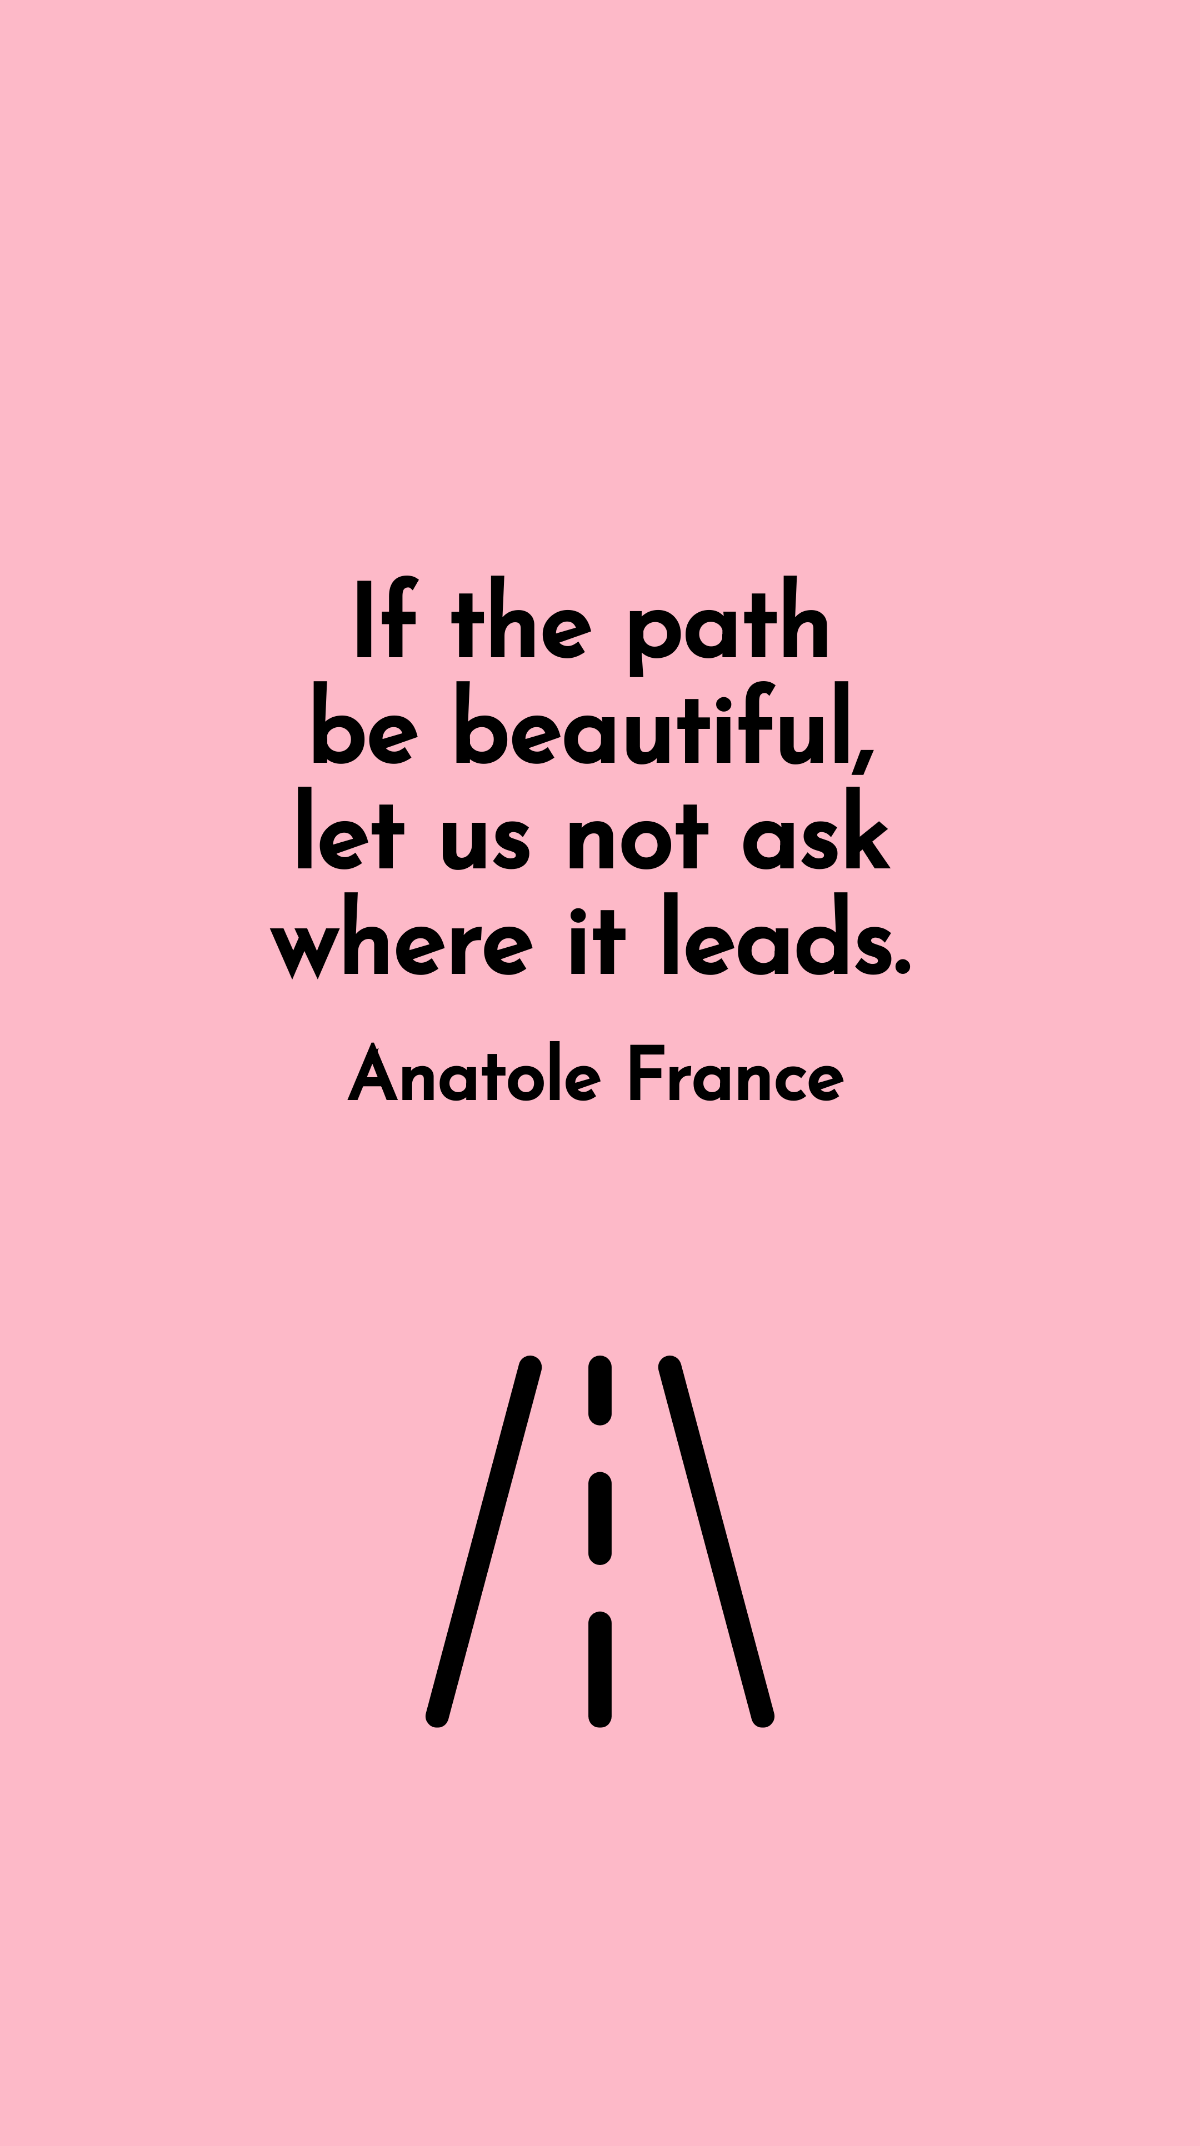 Anatole France - If the path be beautiful, let us not ask where it leads. Template